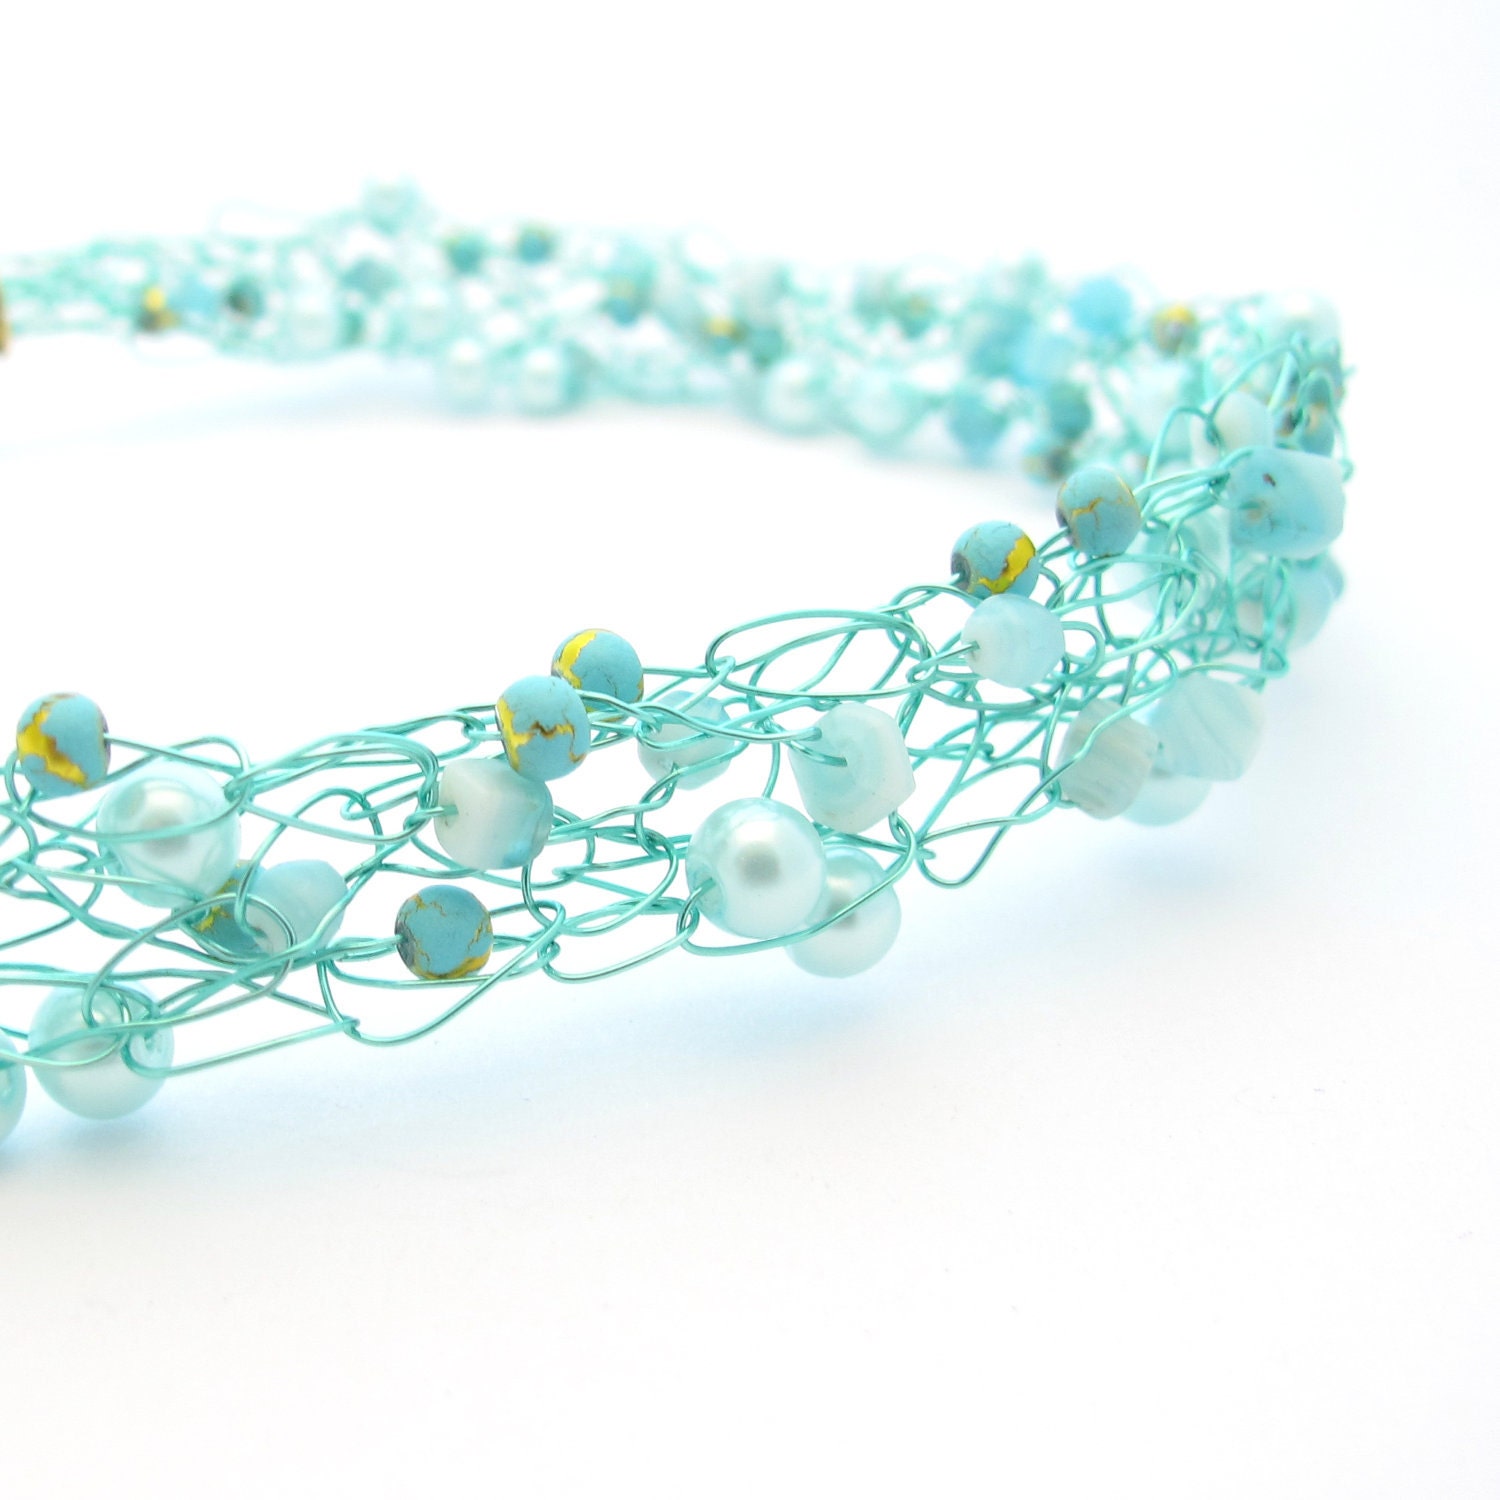 Wire Crochet Beaded Necklace - Aqua, Turquoise, and Gold - MoonlightShimmer